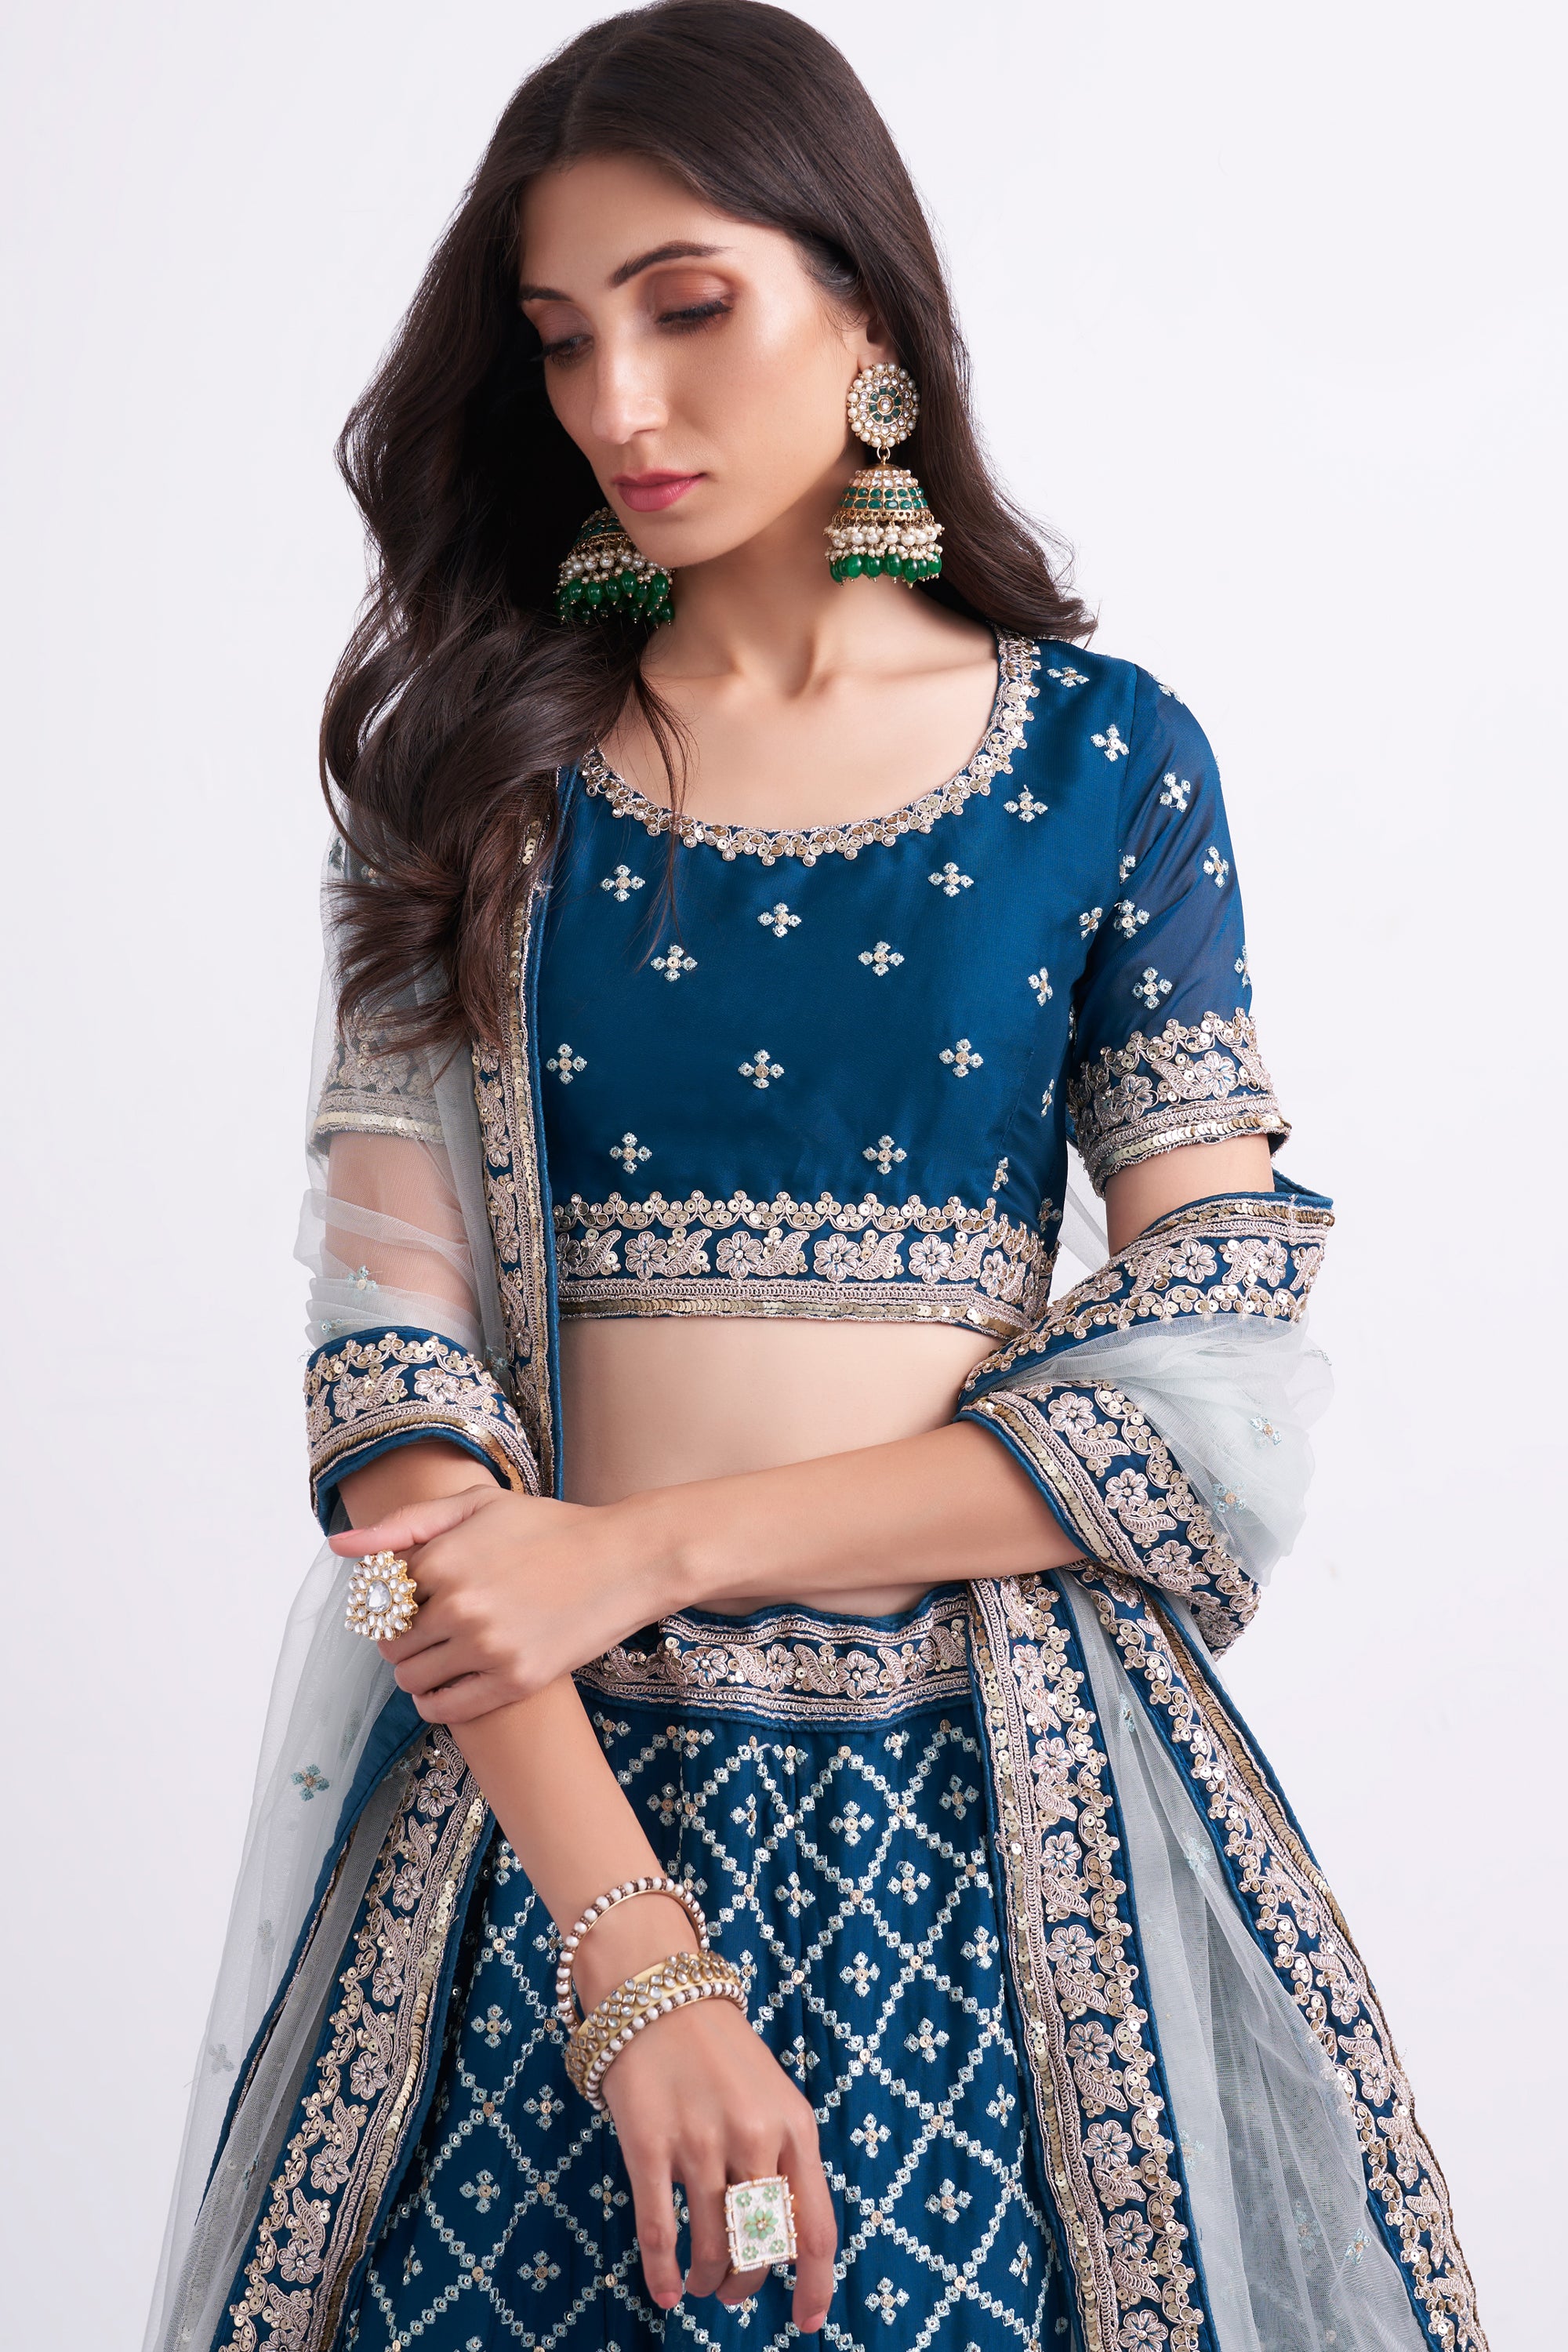 Women's Bridal Heritage Teal Blue Heavy Embroidered Silky Georgette Designer Lehenga - CHITRAS